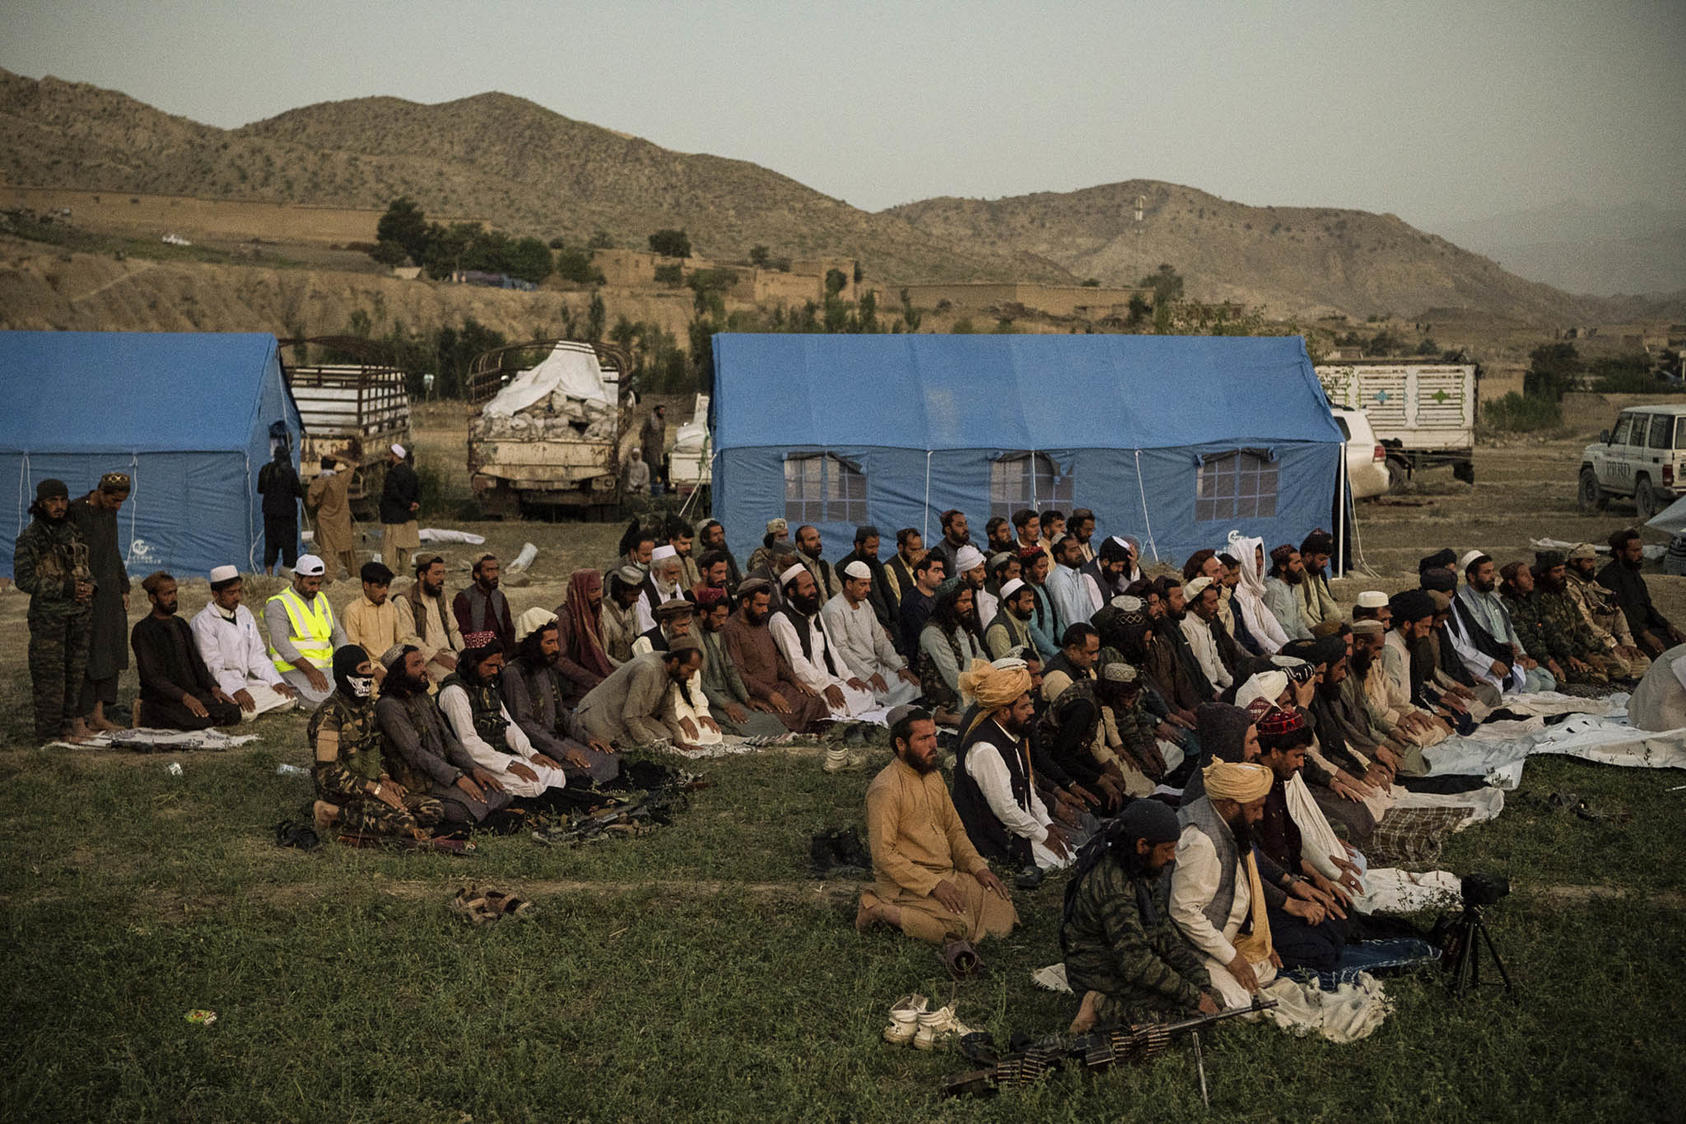 Taliban officials pray before distributing relief supplies in the Geyun district of Paktika Province, Afghanistan on June 23, 2022. (Kiana Hayeri/The New York Times)